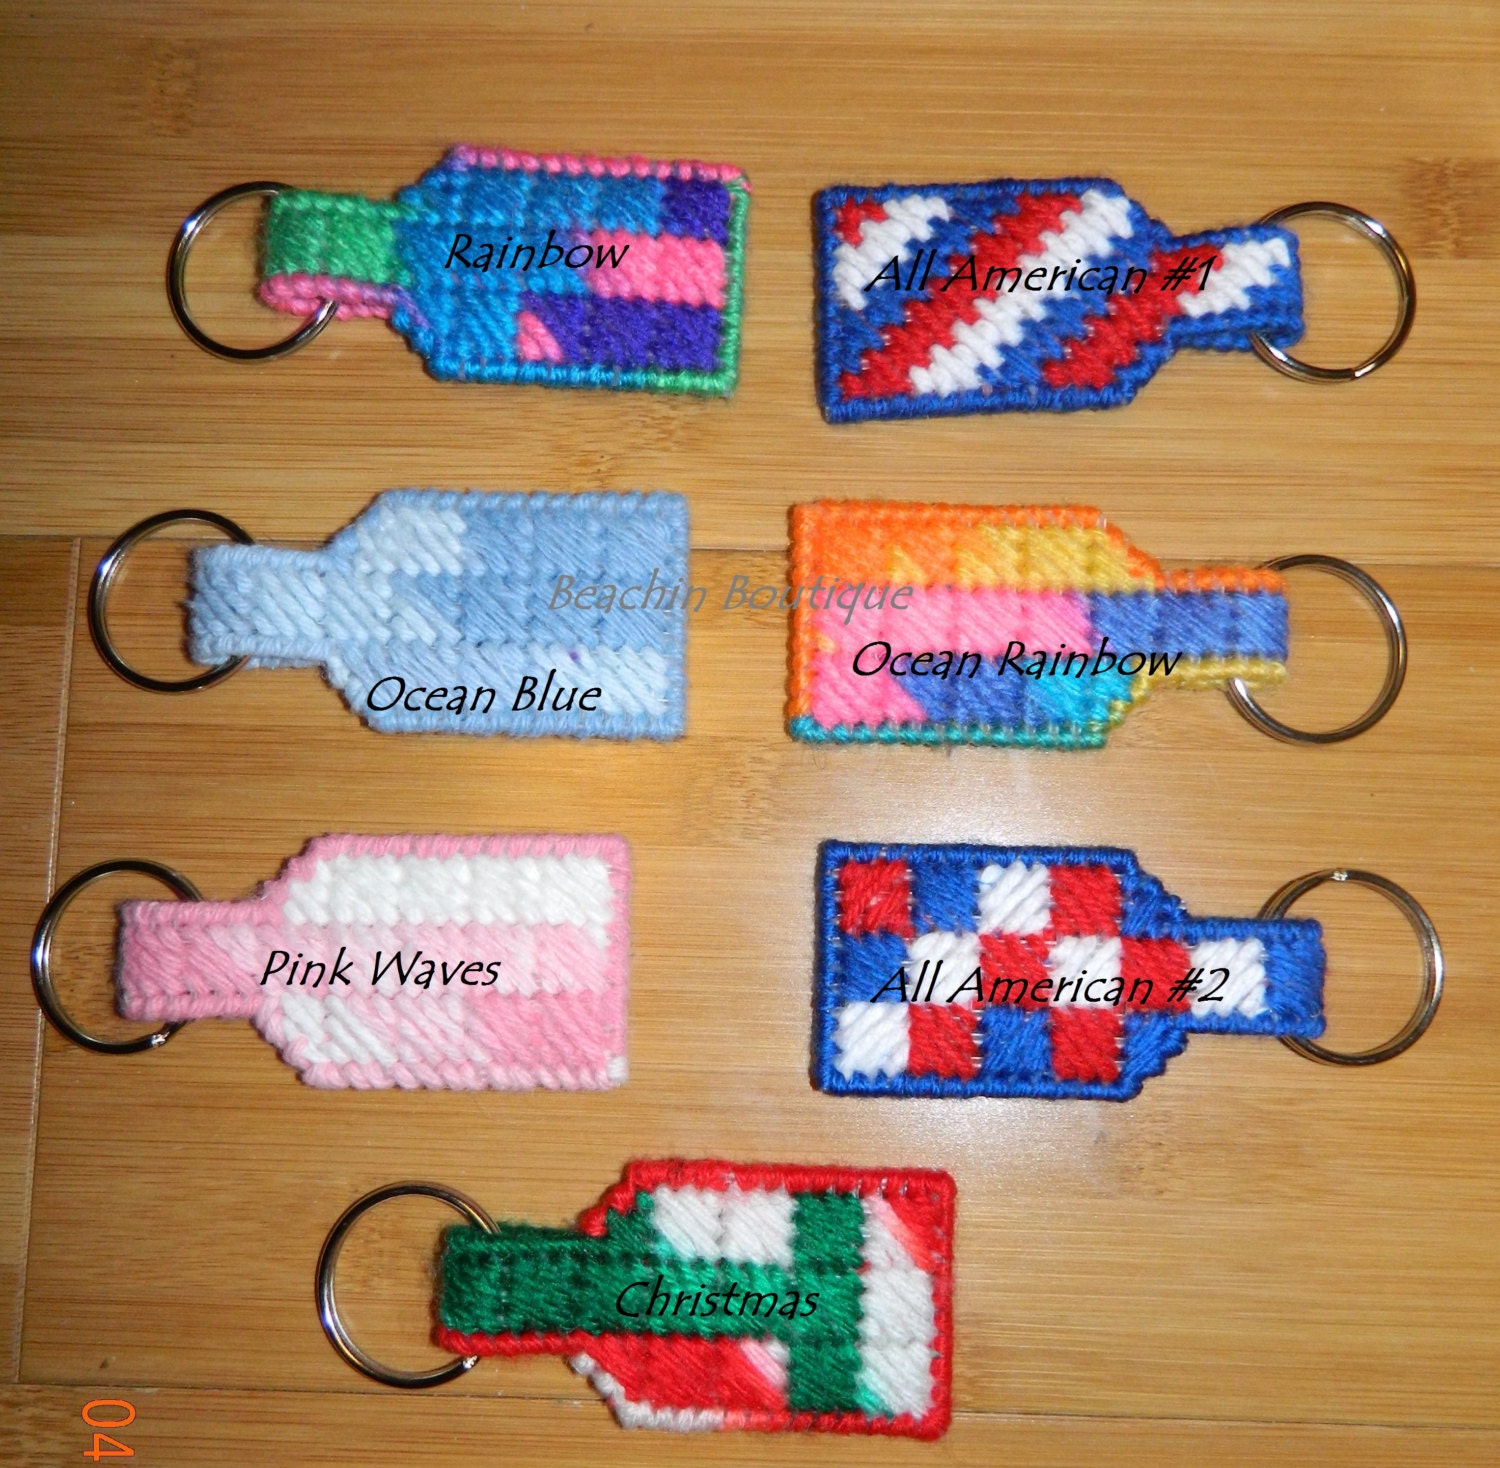 Download Plastic canvas Key Chains by BeachinBoutique on Etsy